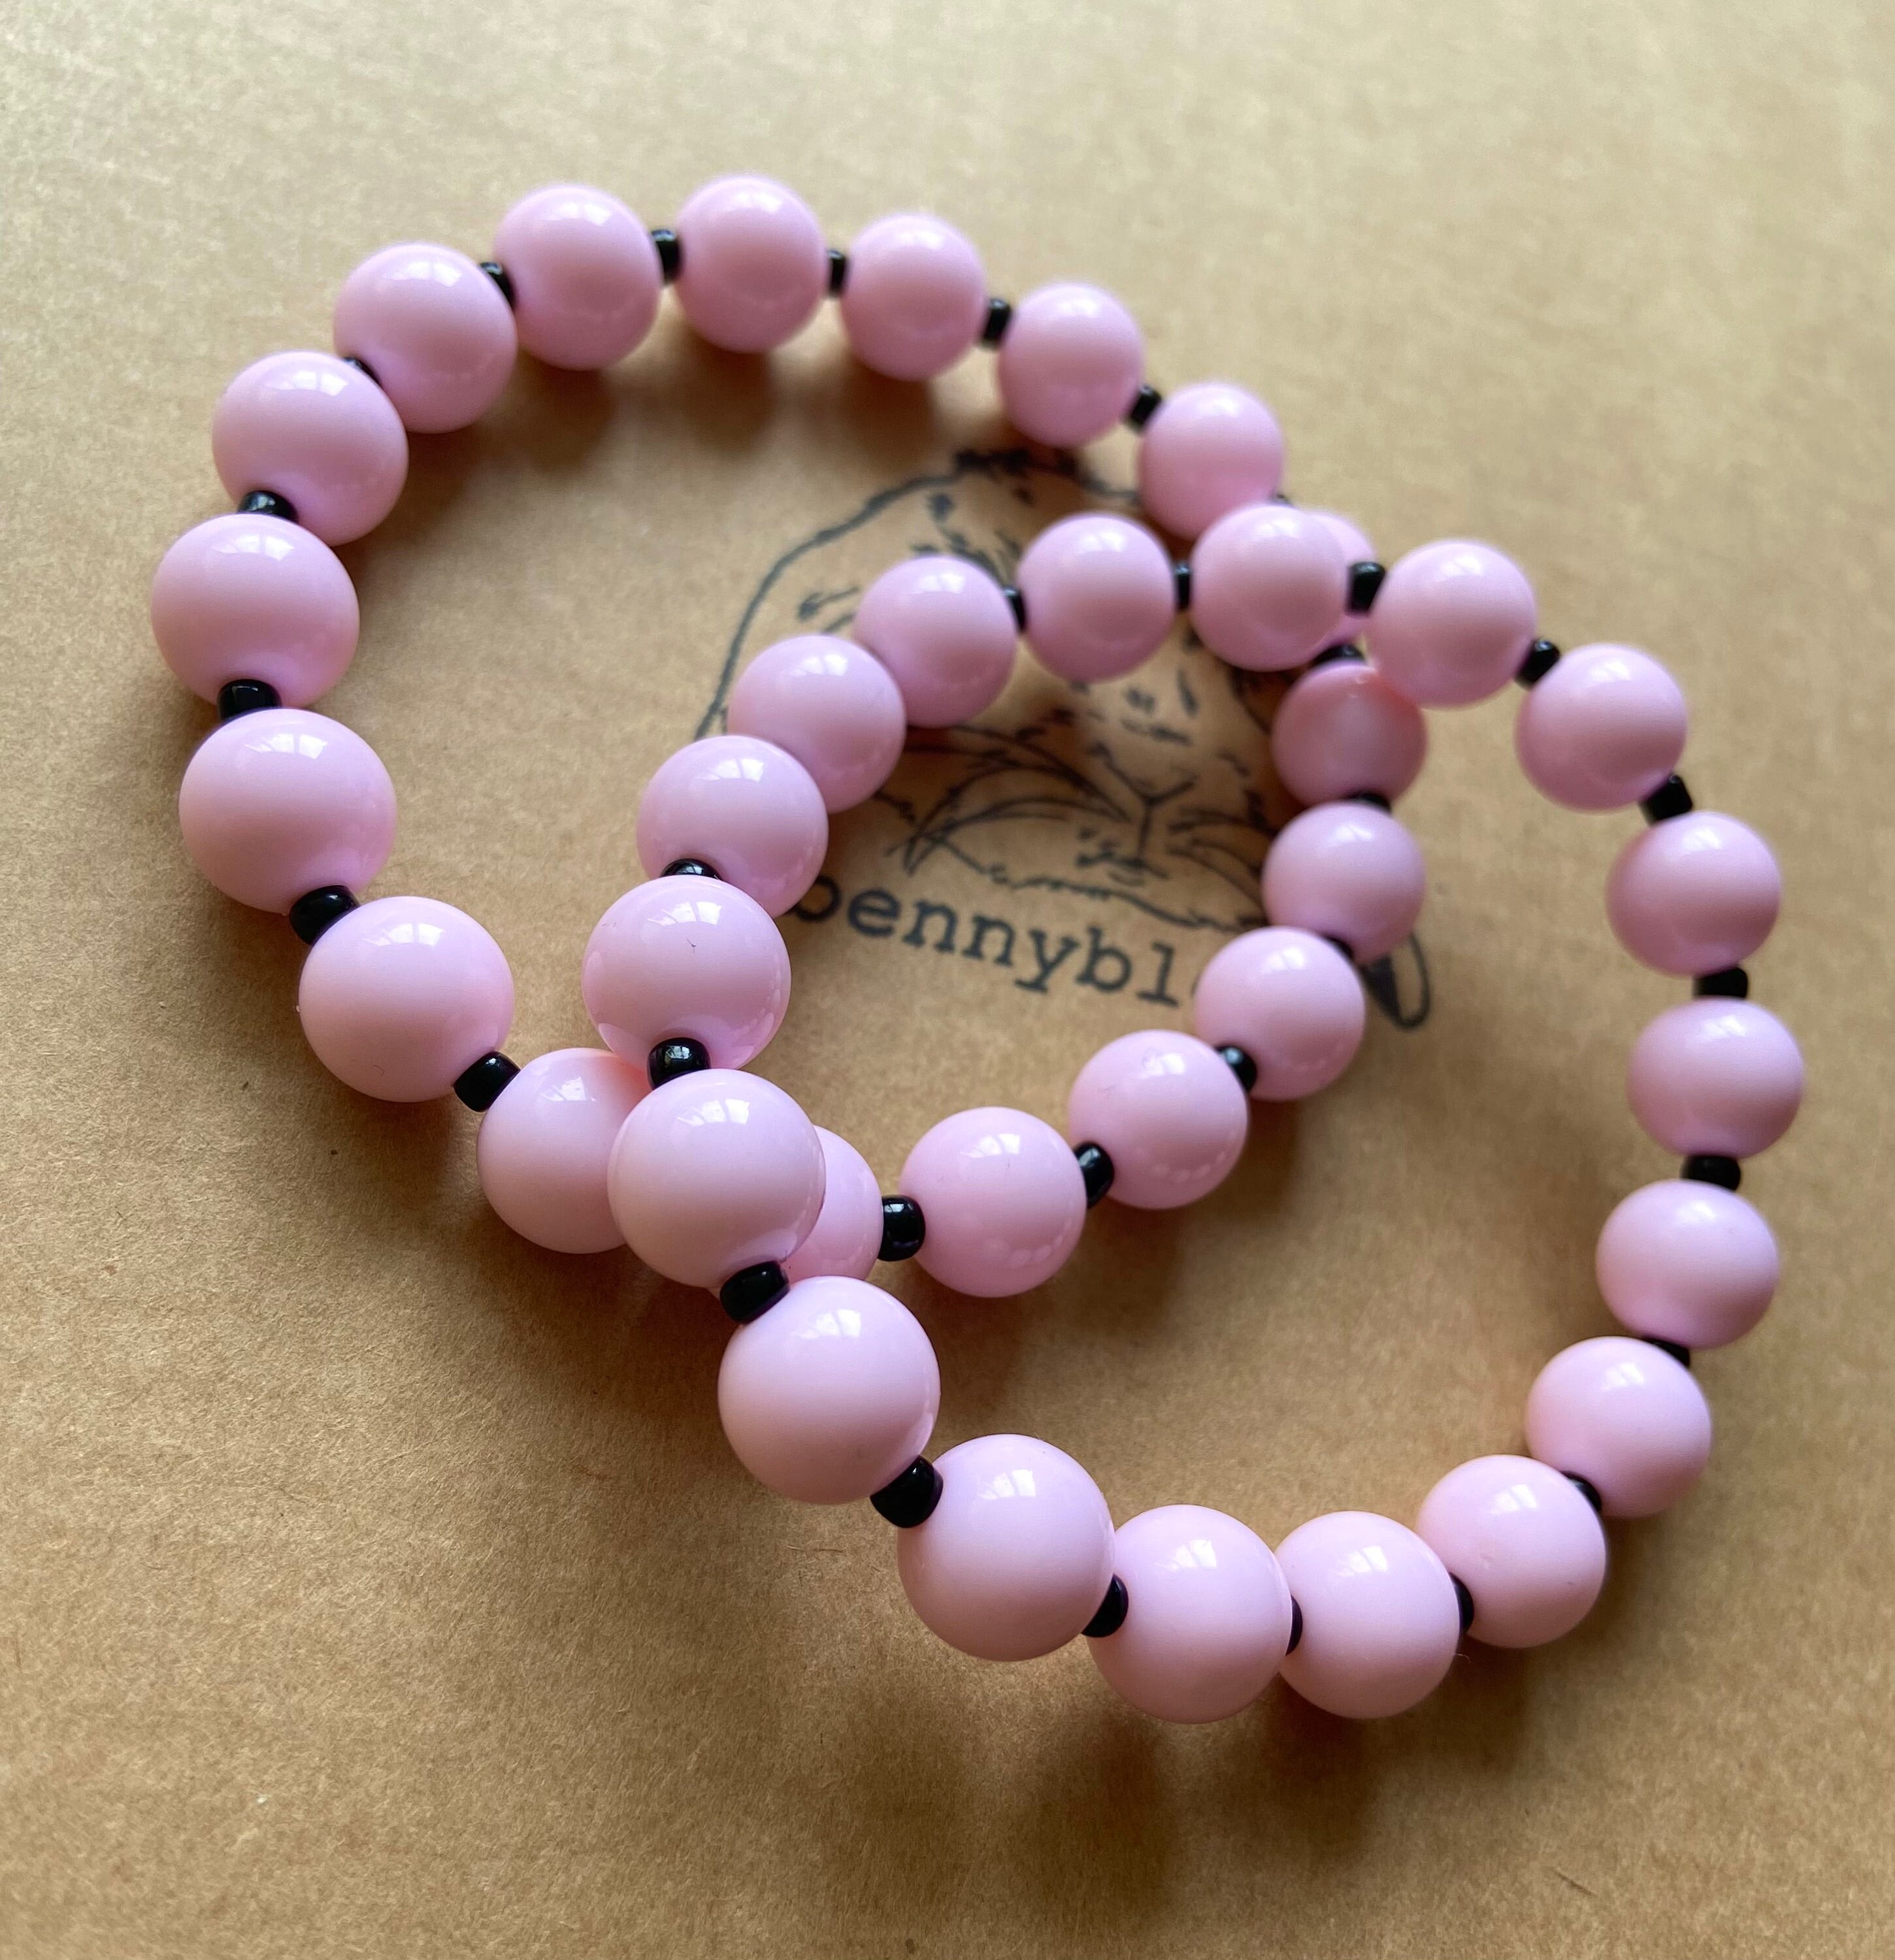 1Pc 30/25/20mm Handmade Ceramic Extra Large Macrame Beads with Large Holes  7mm- Round Clay Beads for Unique Jewelry Making - Bubblegum Style